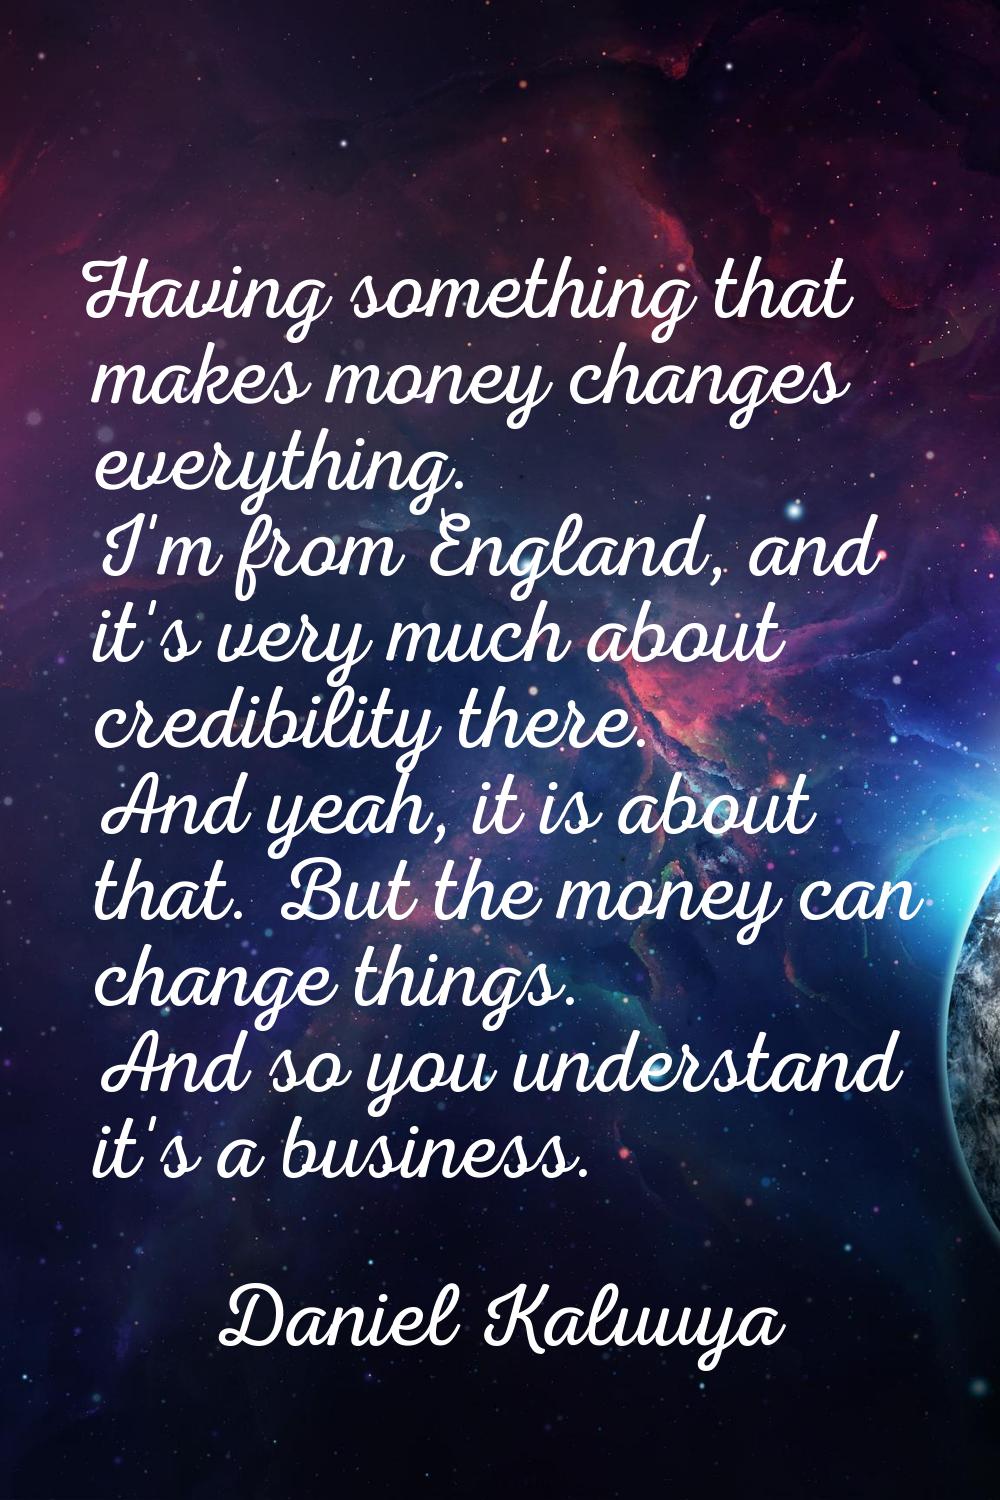 Having something that makes money changes everything. I'm from England, and it's very much about cr